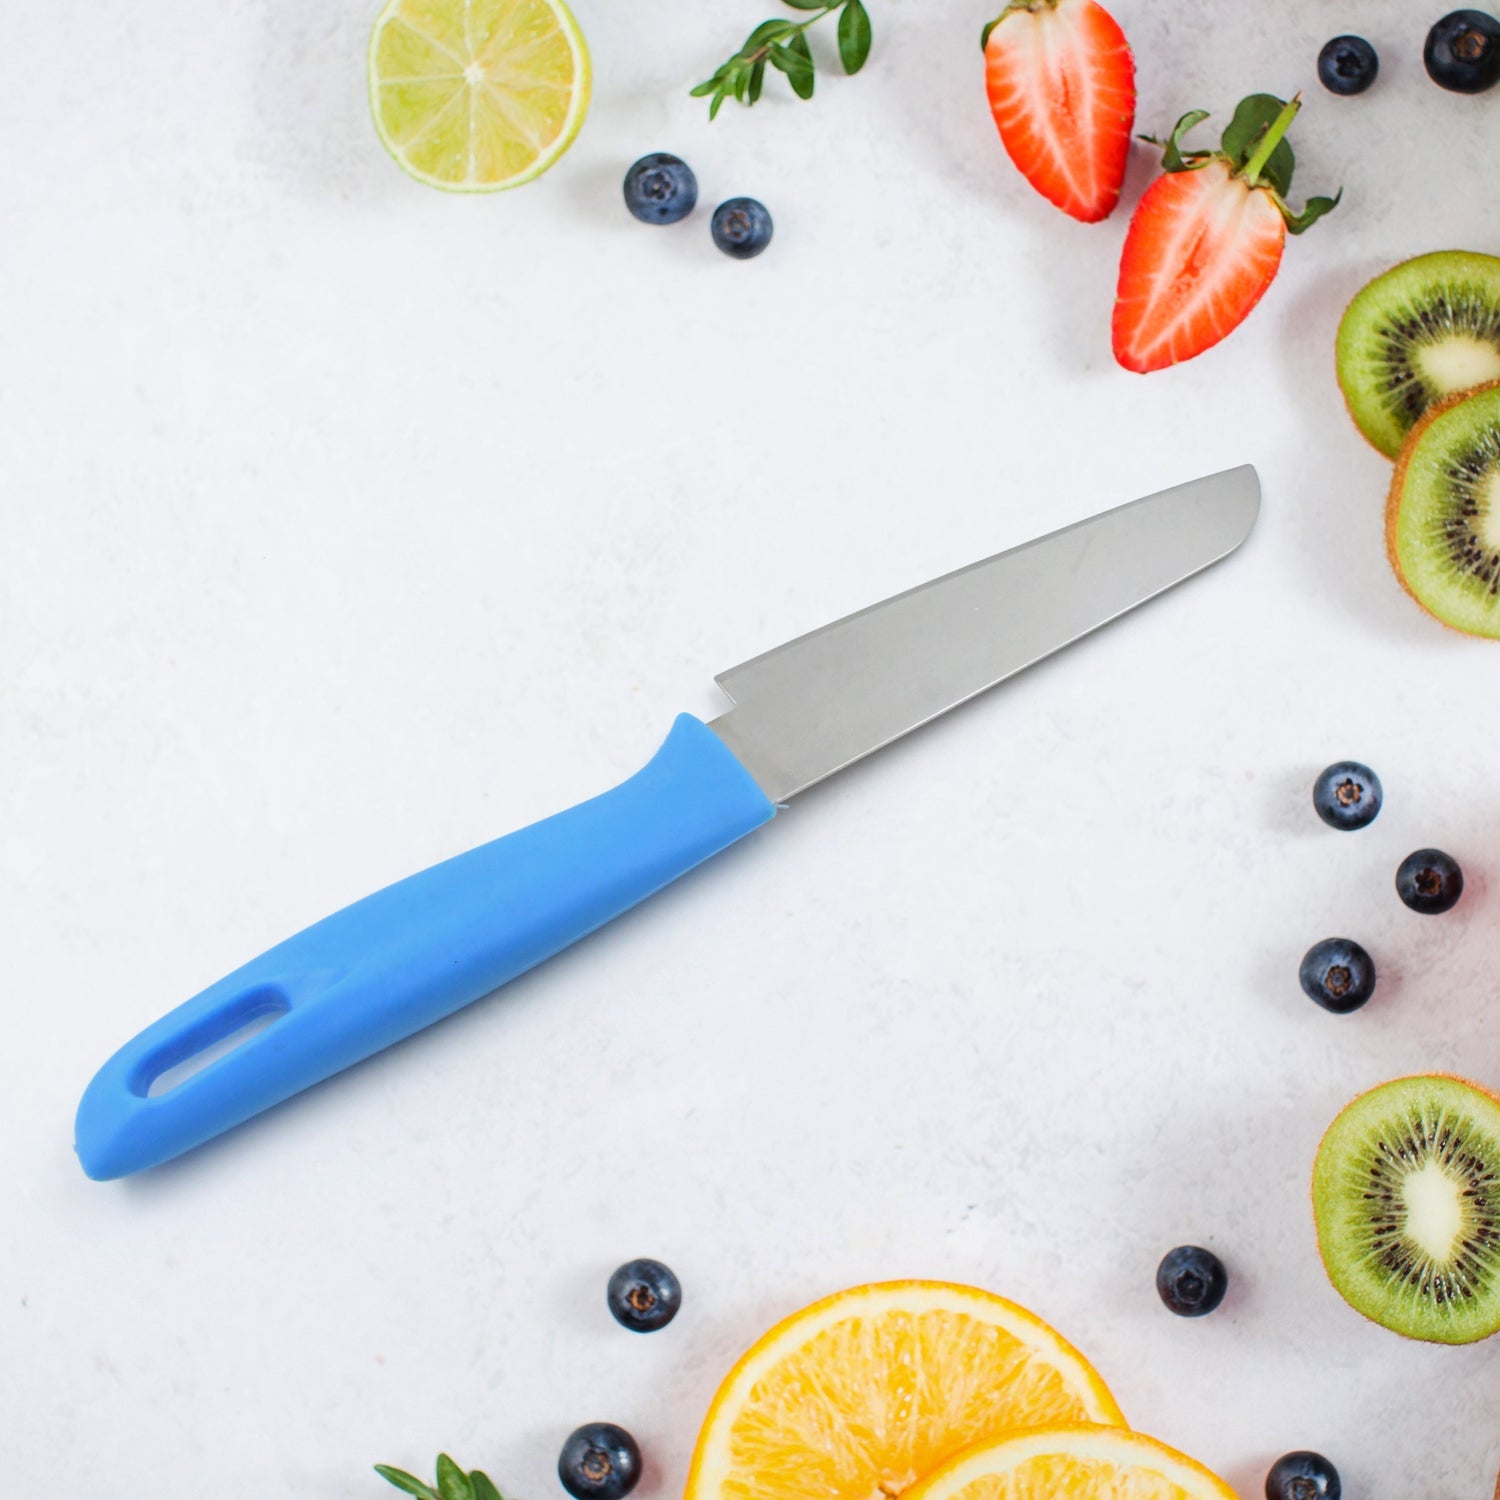 5782 Stainless Steel Knife For Kitchen Use, Knife Set, Knife & Non-Slip Handle With Blade Cover Knife, Fruit, Vegetable,Knife Set (1 Pc)